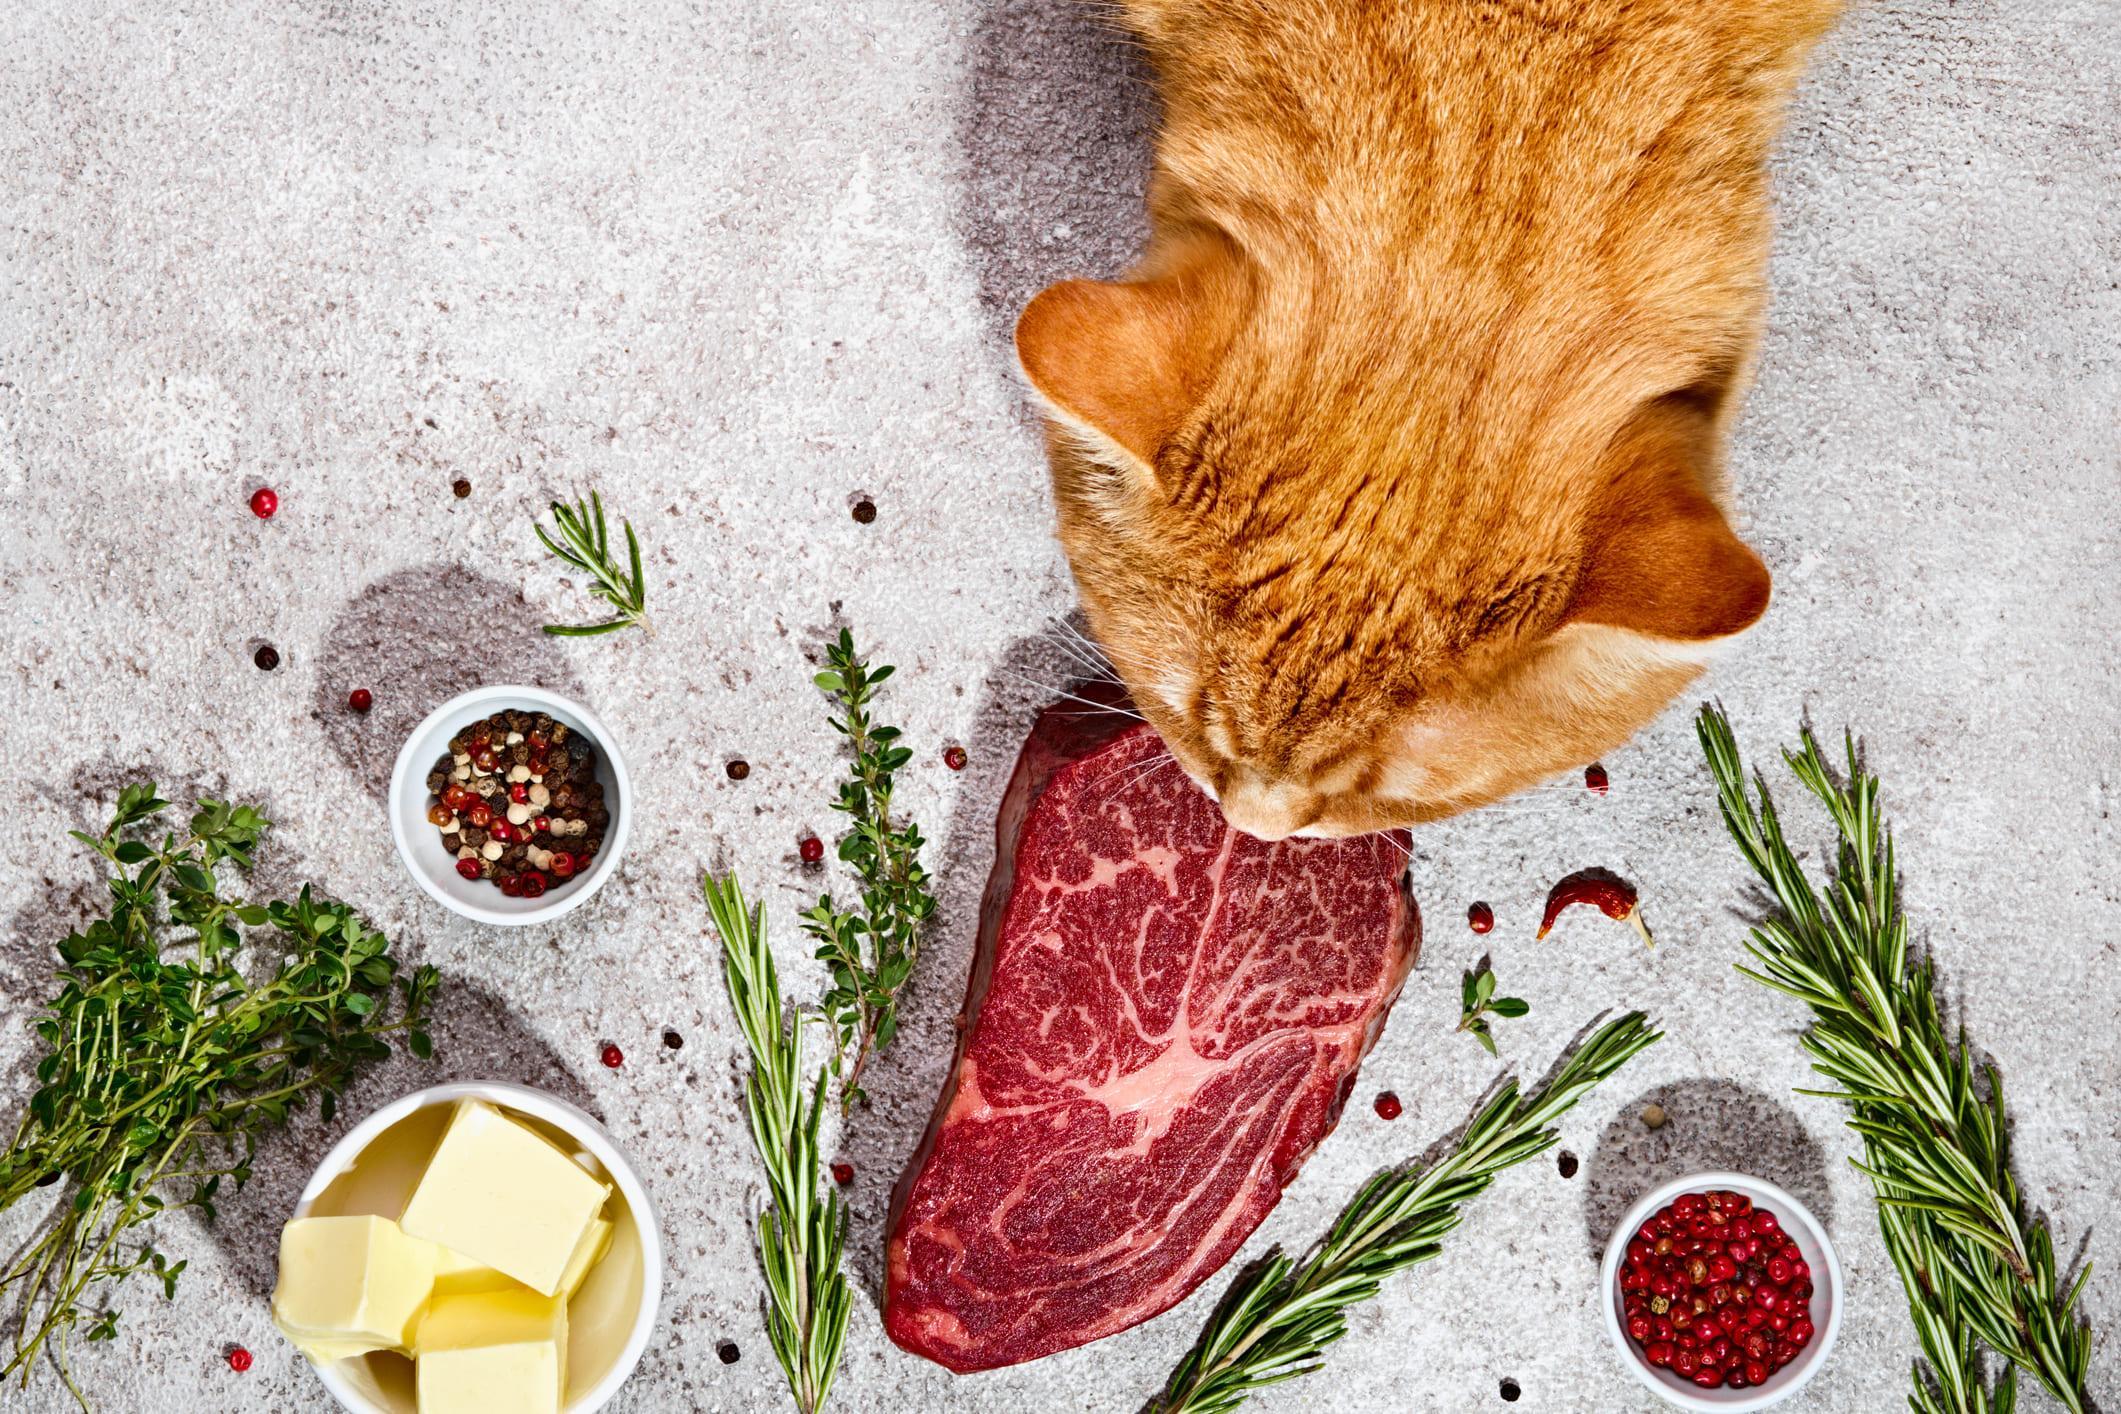 BARF diet for dogs and cats
